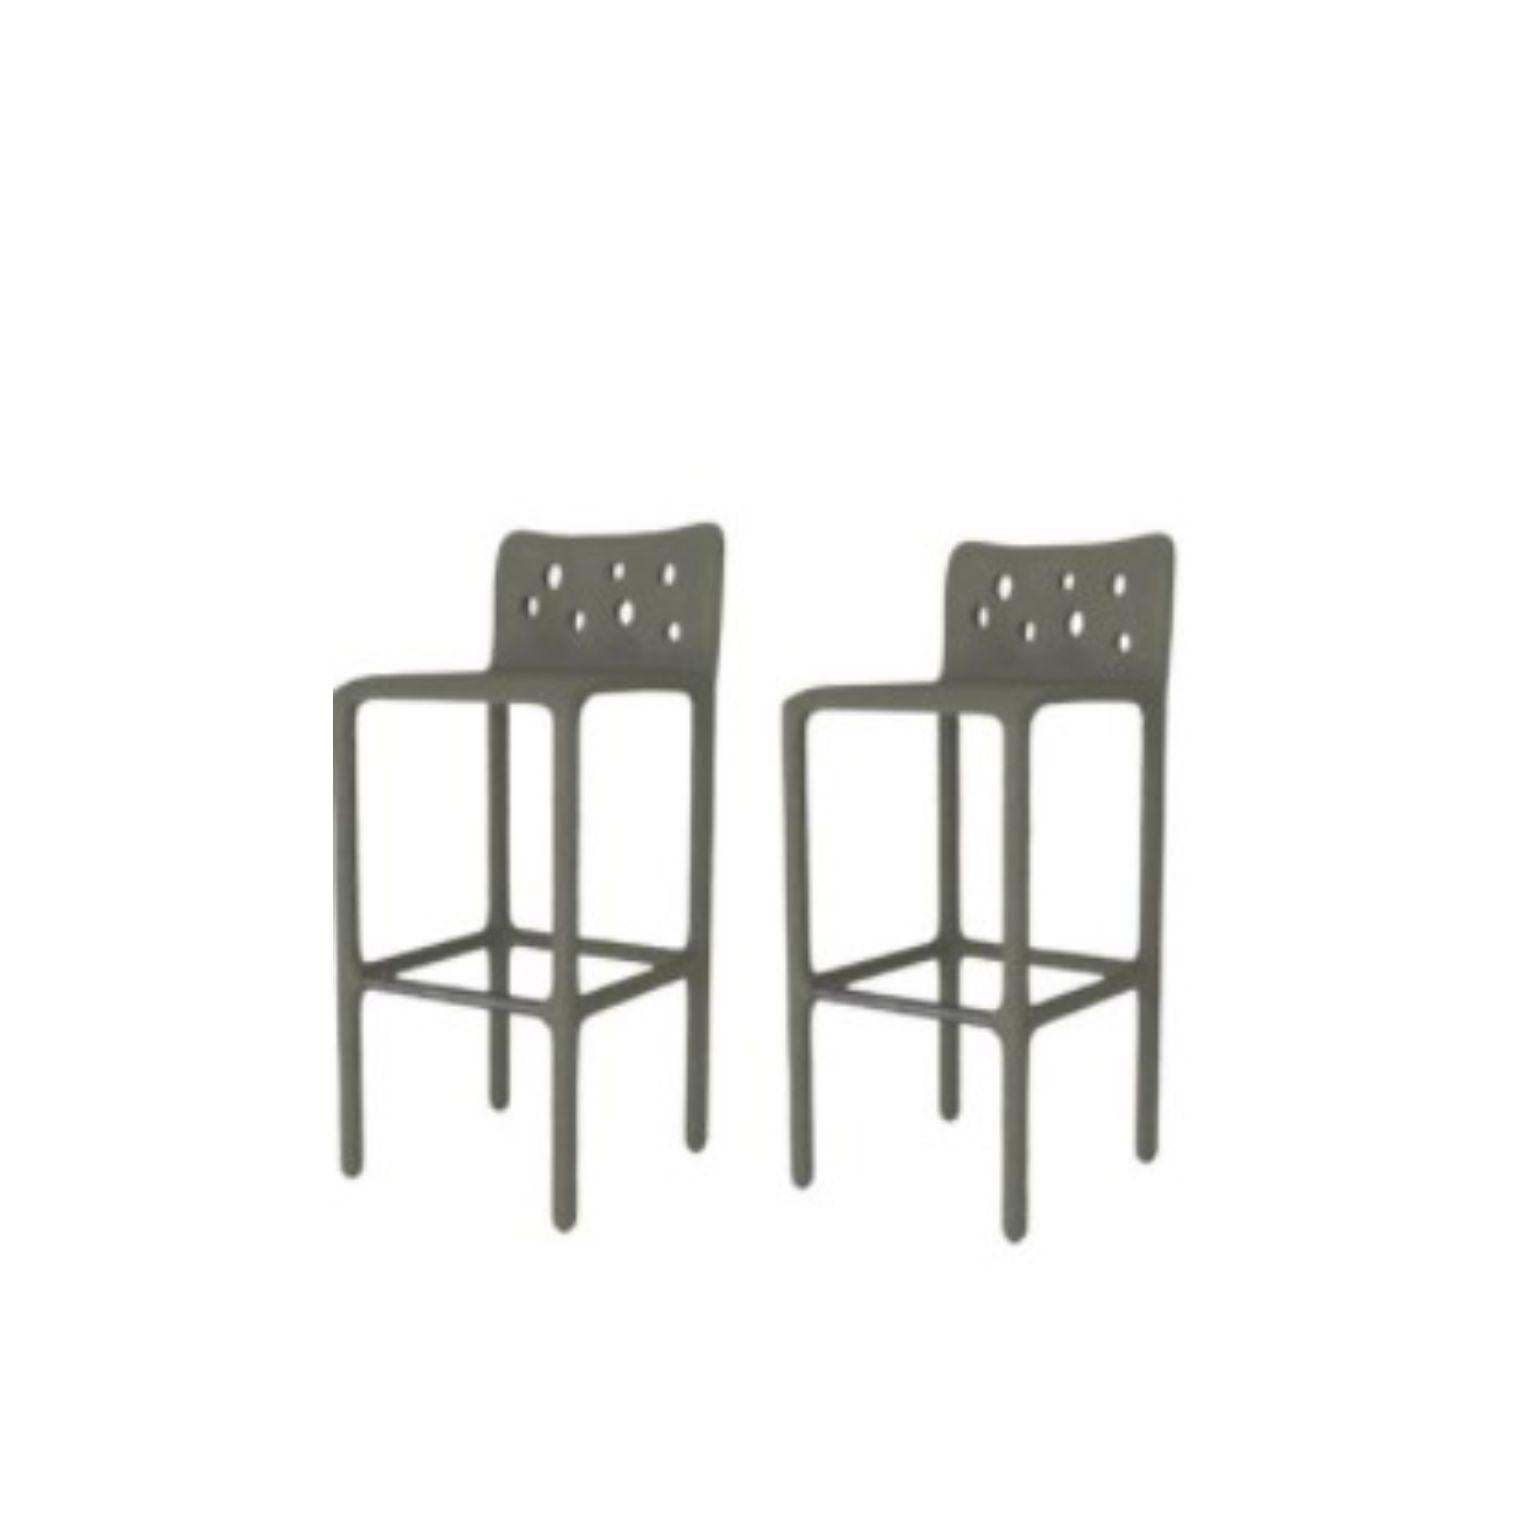 Set of 2 Outdoor green sculpted contemporary chairs by Faina
Design: Victoriya Yakusha
Material: steel, flax rubber, biopolymer, cellulose
Dimensions: Height: 106 x Width: 45 x Sitting place width: 49 Legs height: 80 cm
Weight: 20